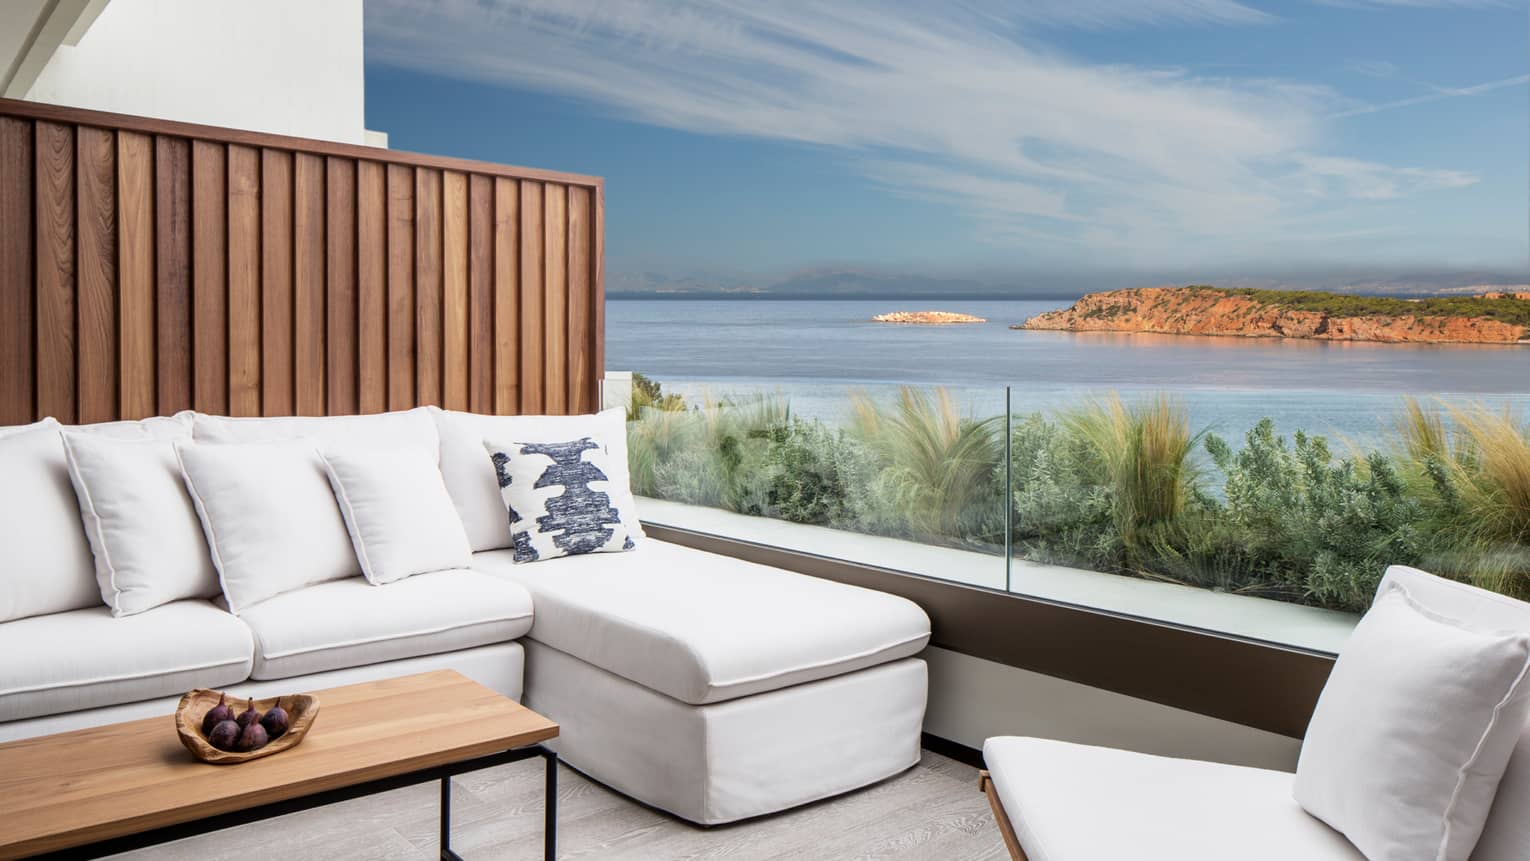 Outdoor terrace with white sofa and accent chair, rectangular coffee table, ocean views